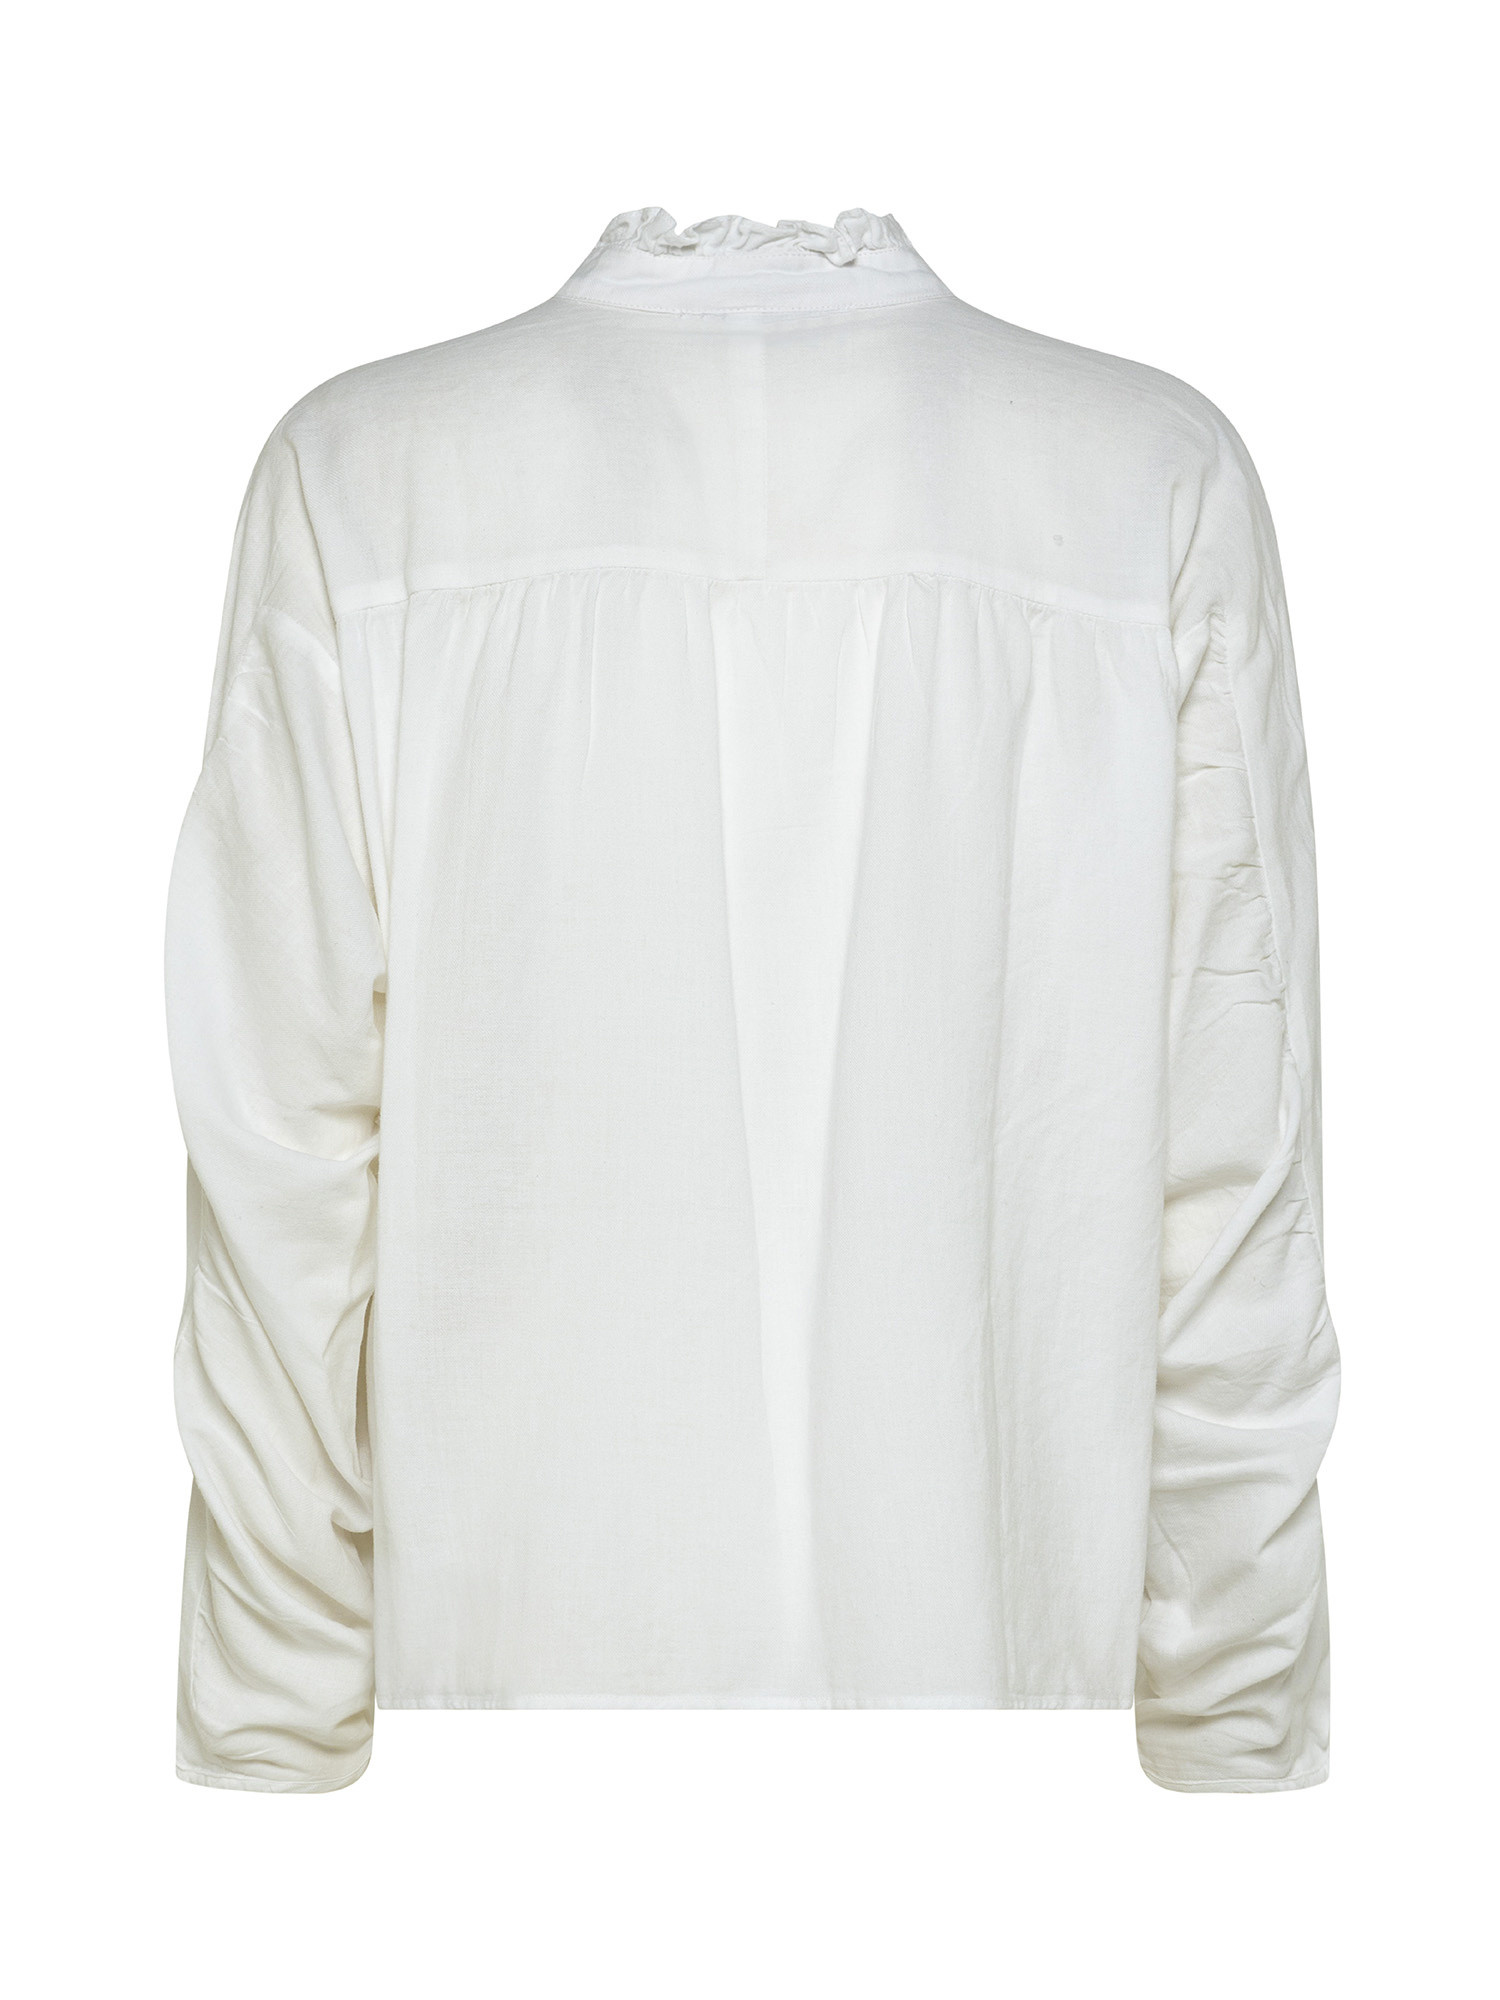 Blusa in cotone con maniche lunghe, Bianco, large image number 1